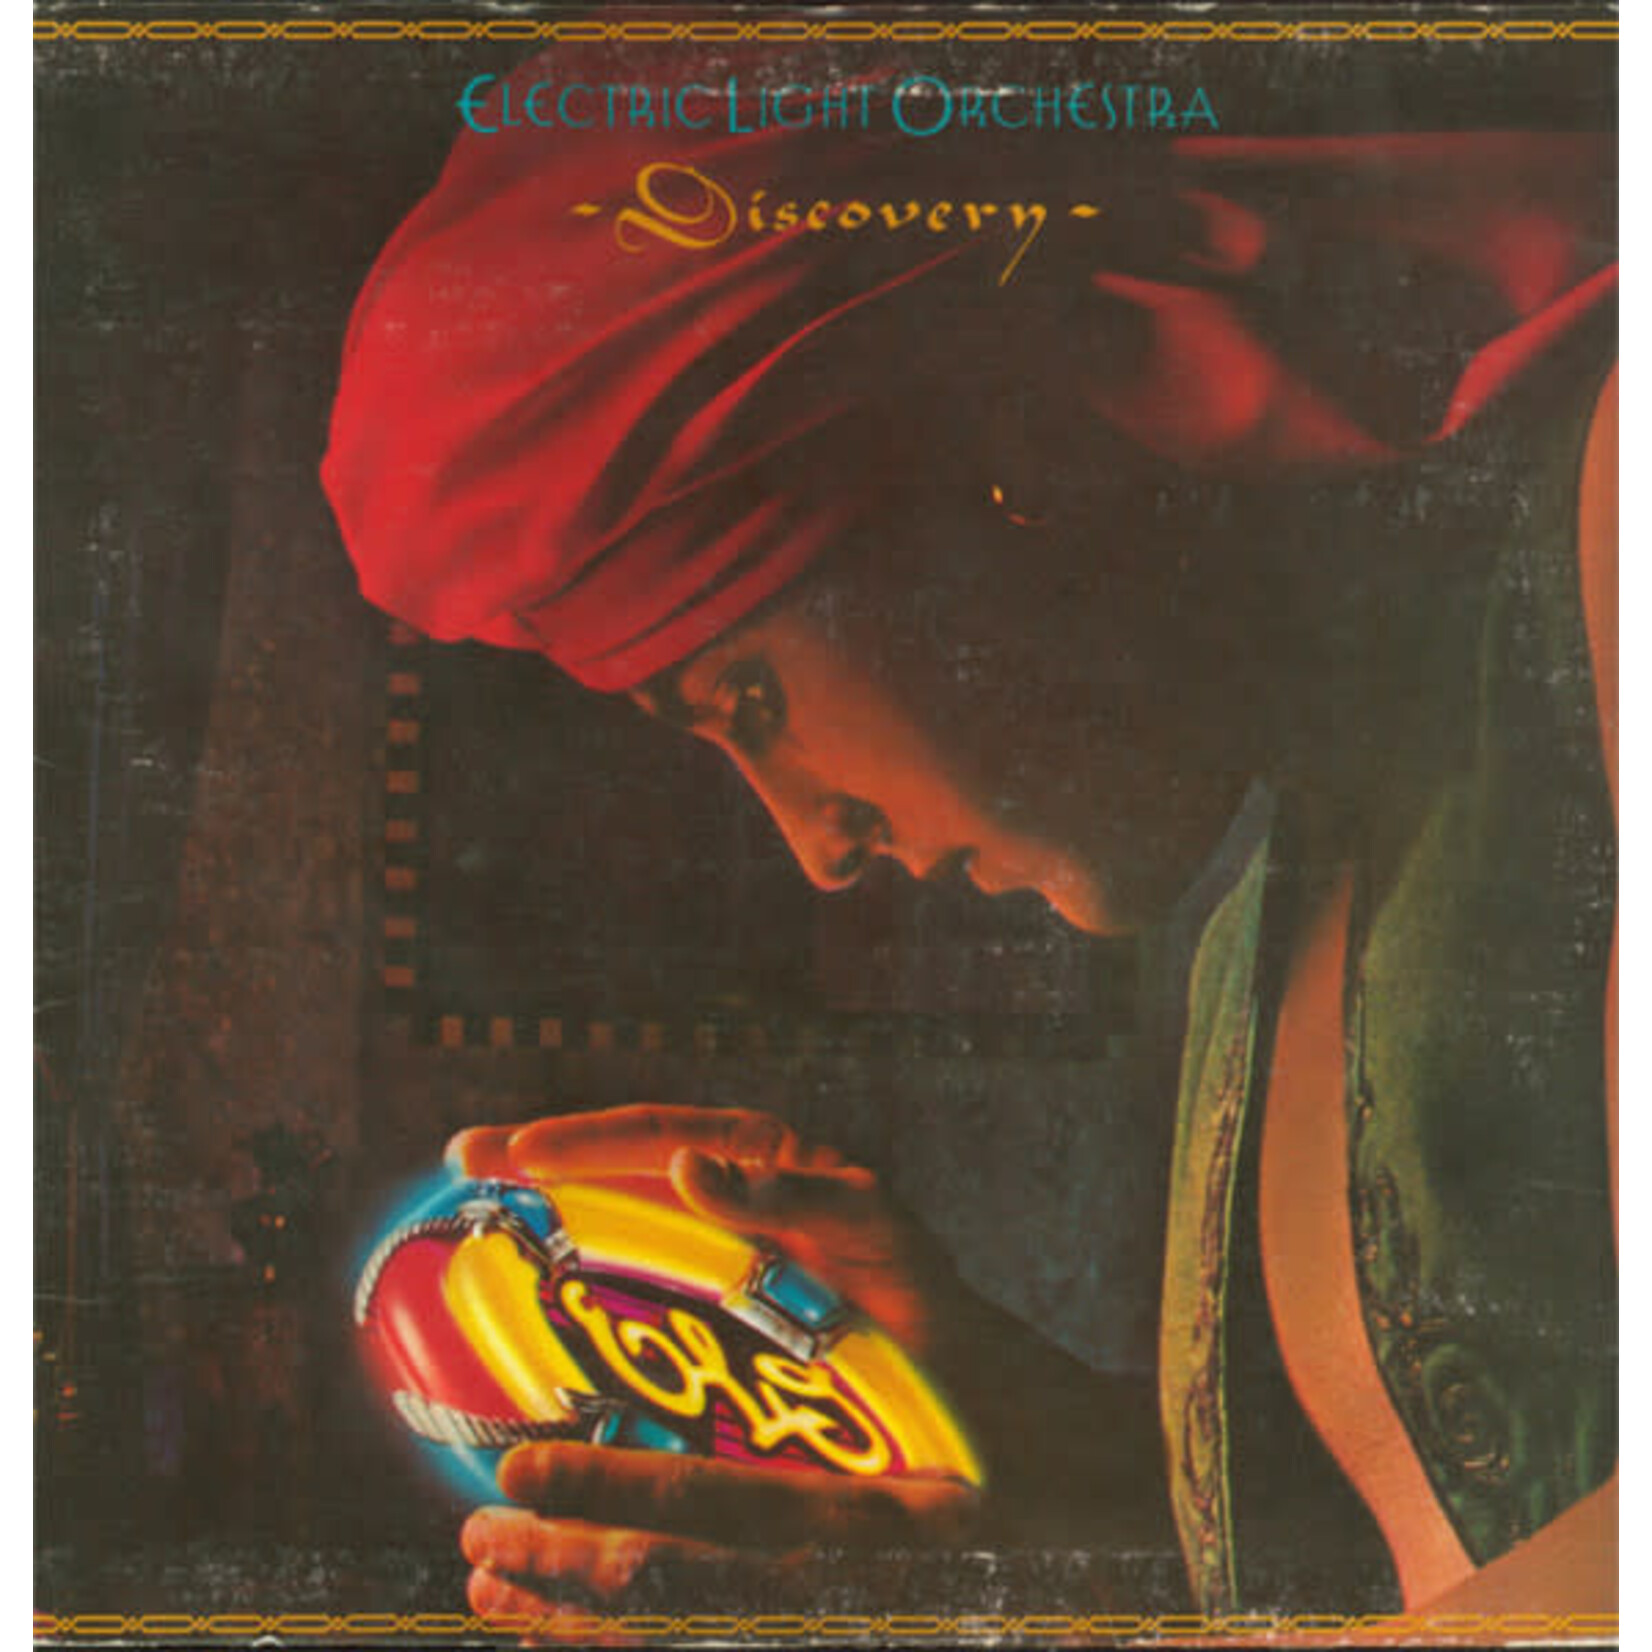 Electric Light Orchestra Electric Light Orchestra – Discovery (VG, 1979, LP, Jet Records – FZ 35769, Canada)